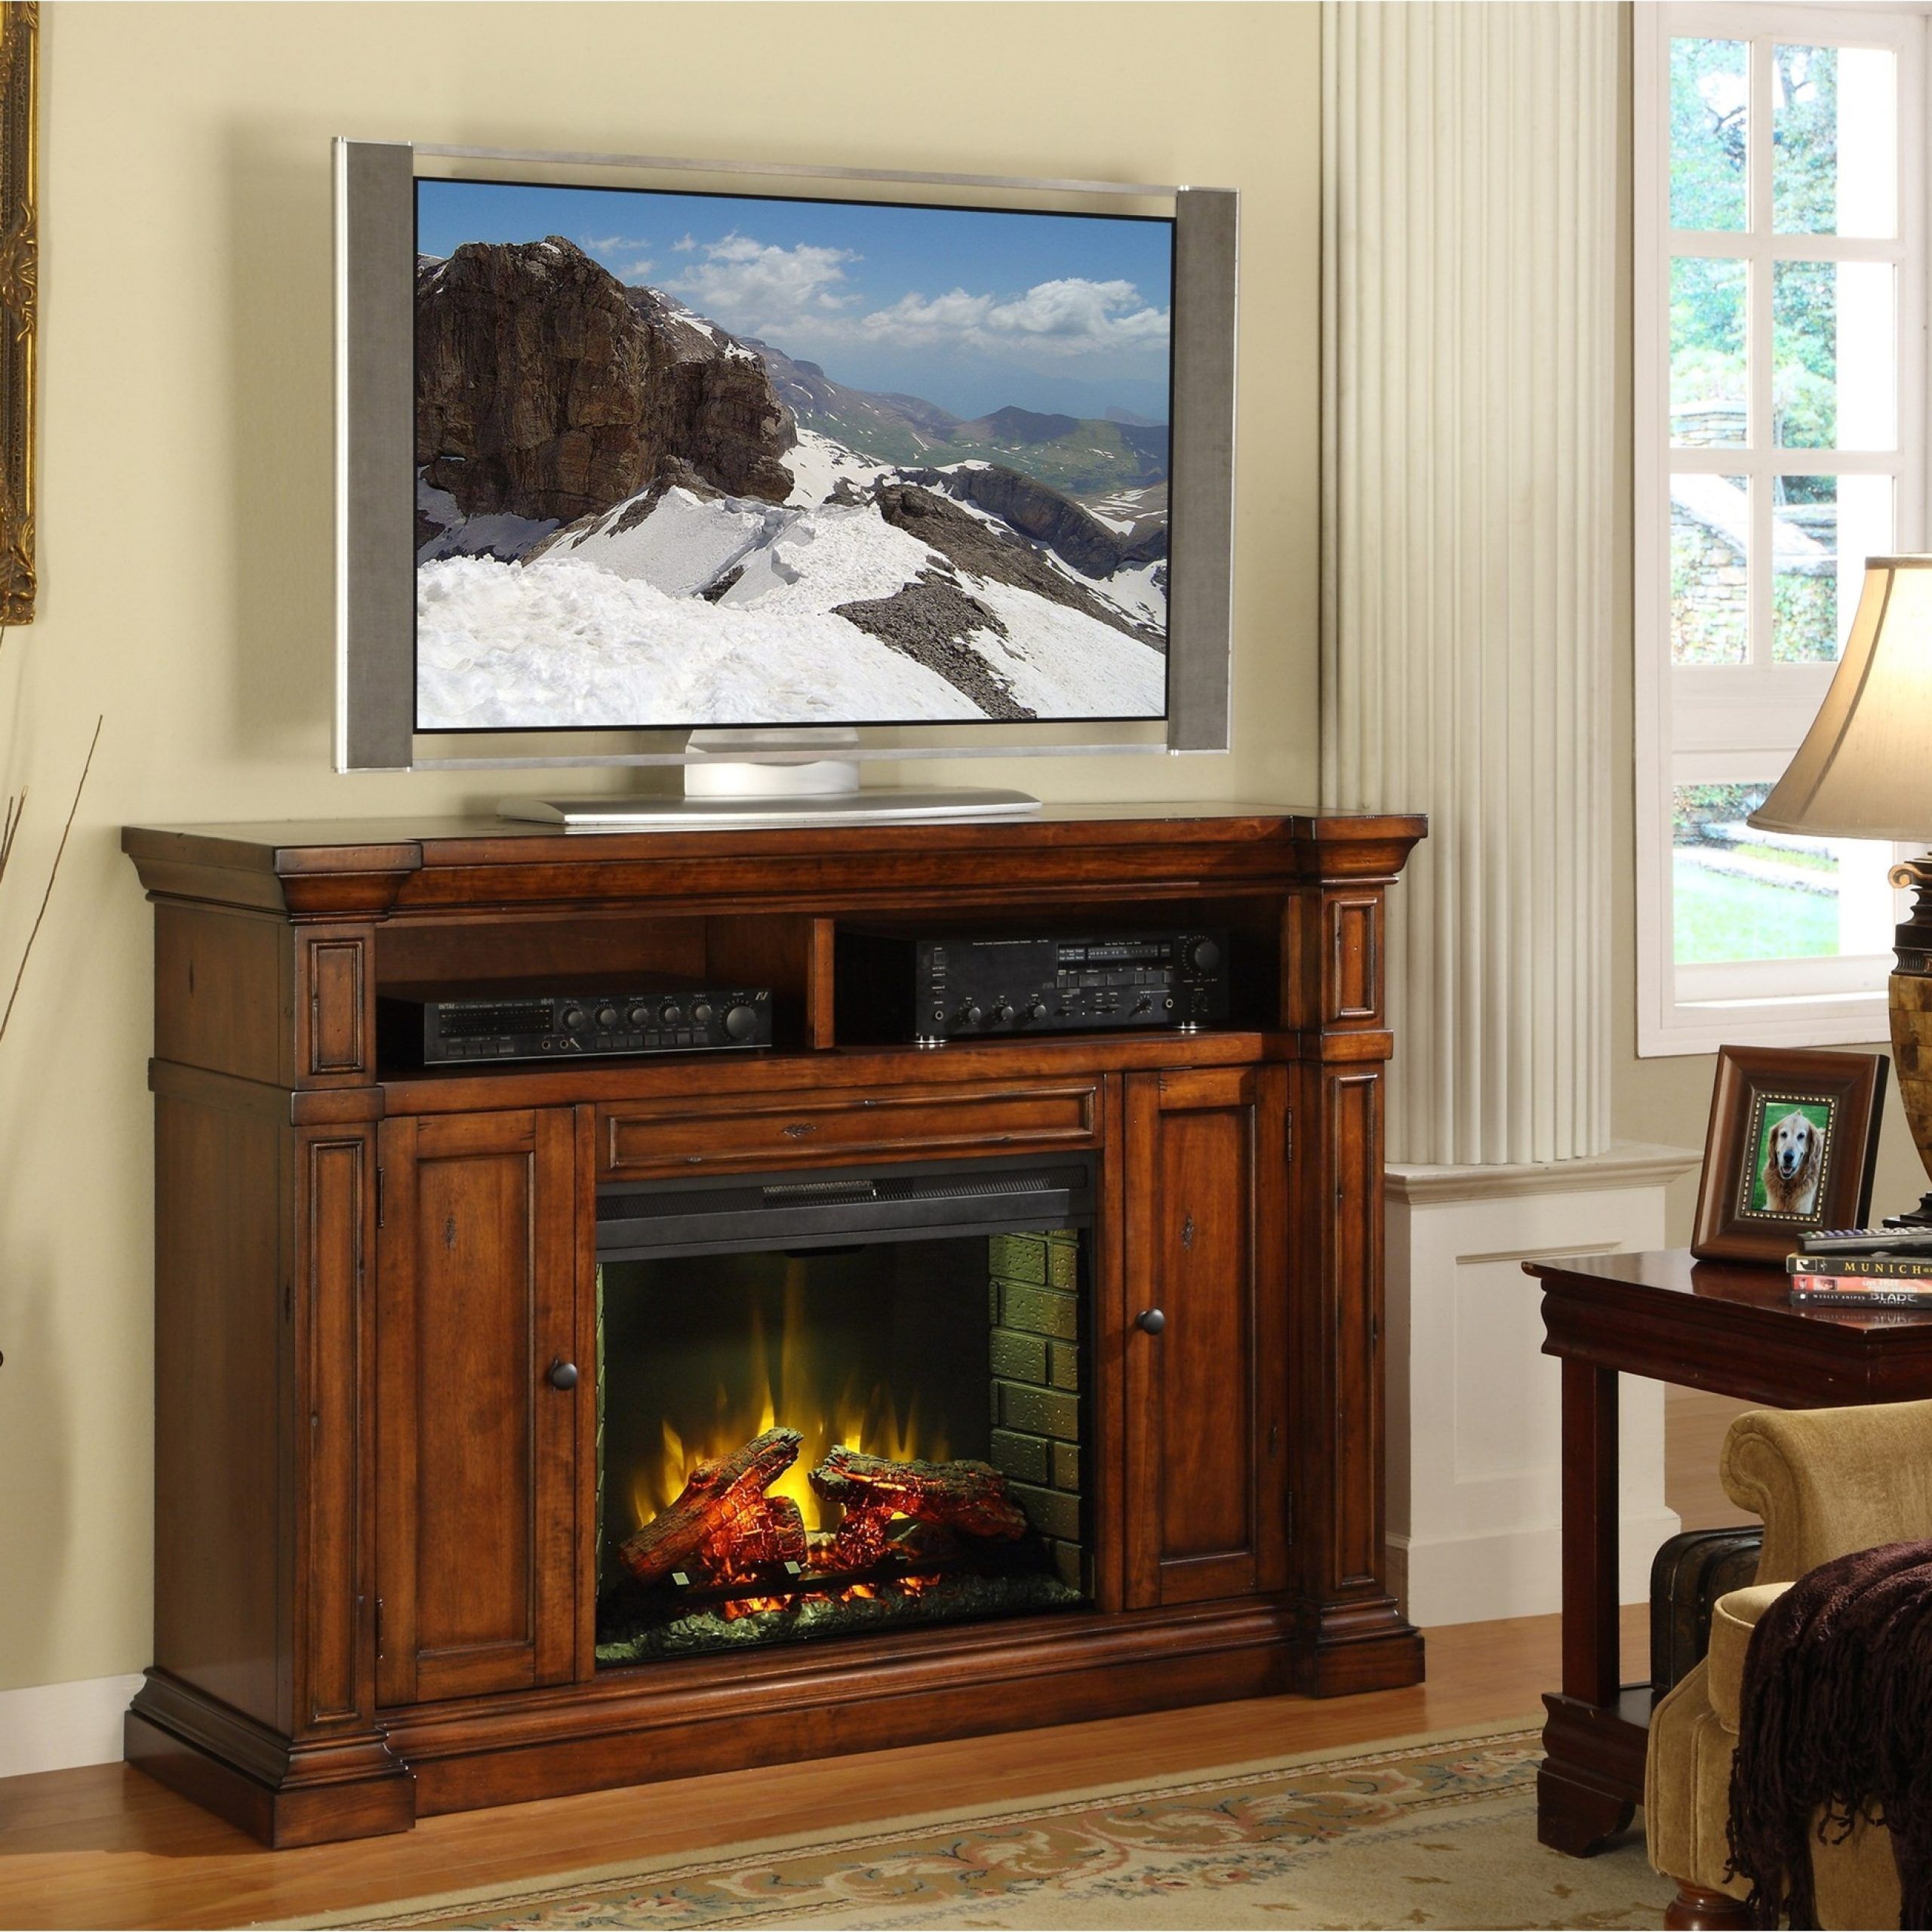 27 Best Of Big Lots Fireplaces Clearance | Fireplace Ideas Throughout Big Lots Tv Stands (View 13 of 15)